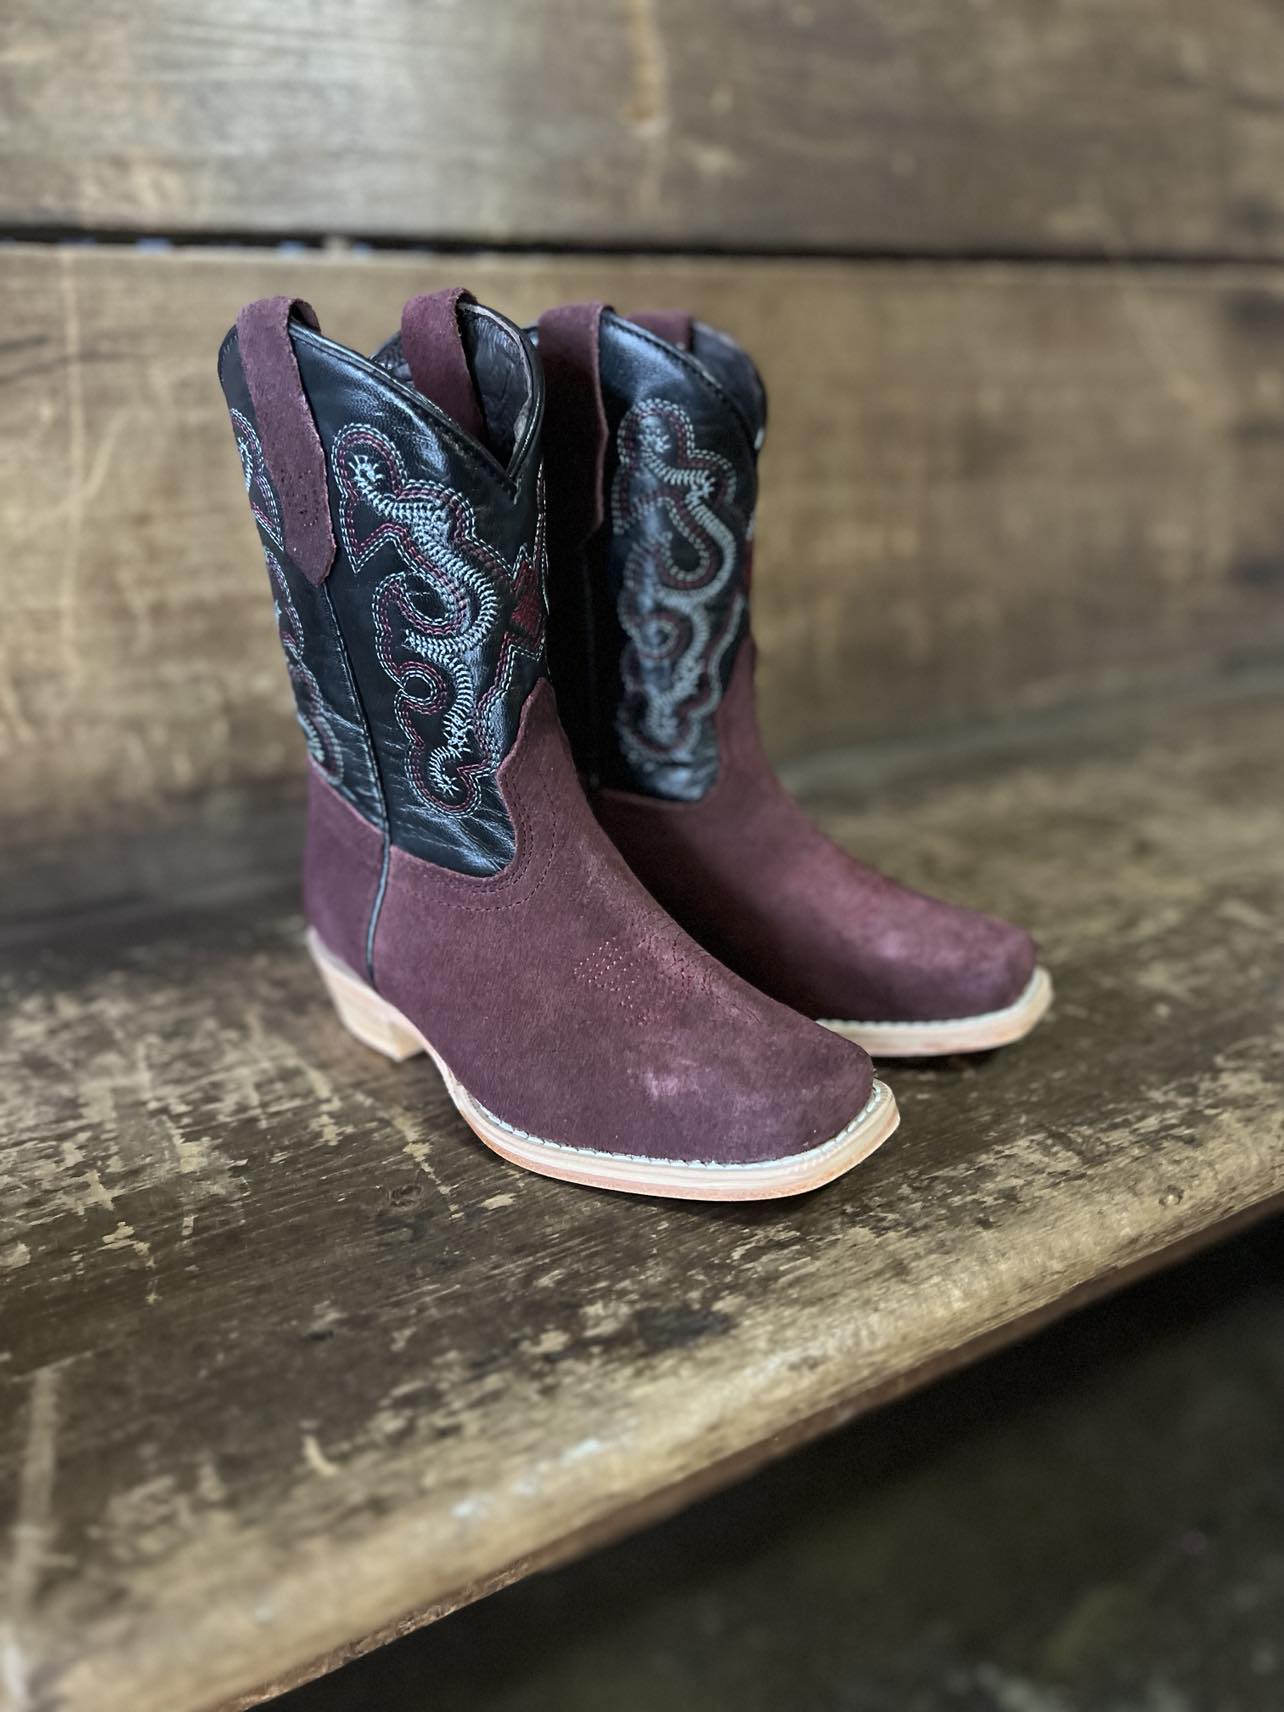 R Watson Kids Rhubarb Rough Out/ Black Cowhide-Kids Boots-R. Watson-Lucky J Boots & More, Women's, Men's, & Kids Western Store Located in Carthage, MO